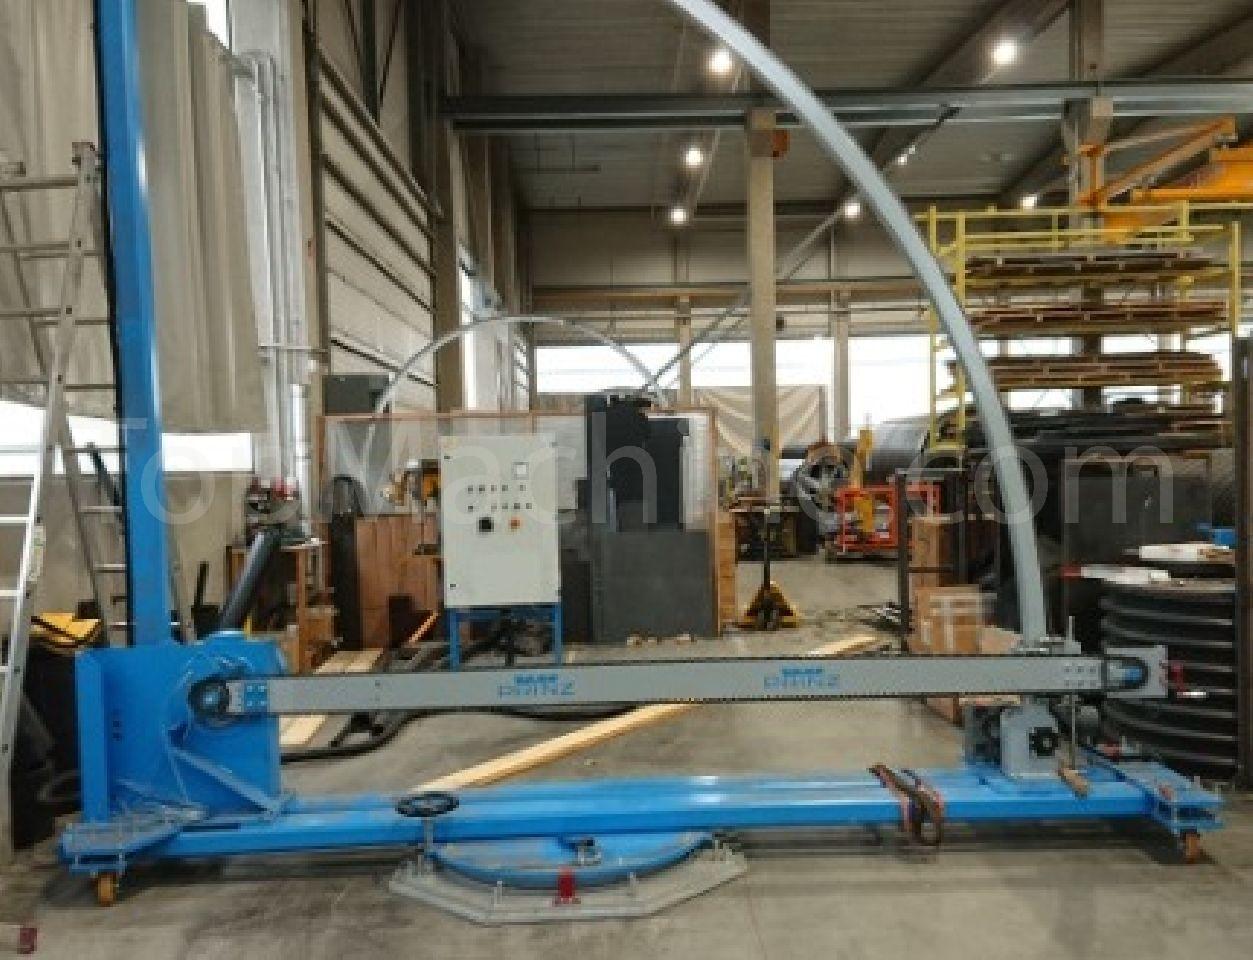 Used Prinz 2550 Extrusion Pipe saw